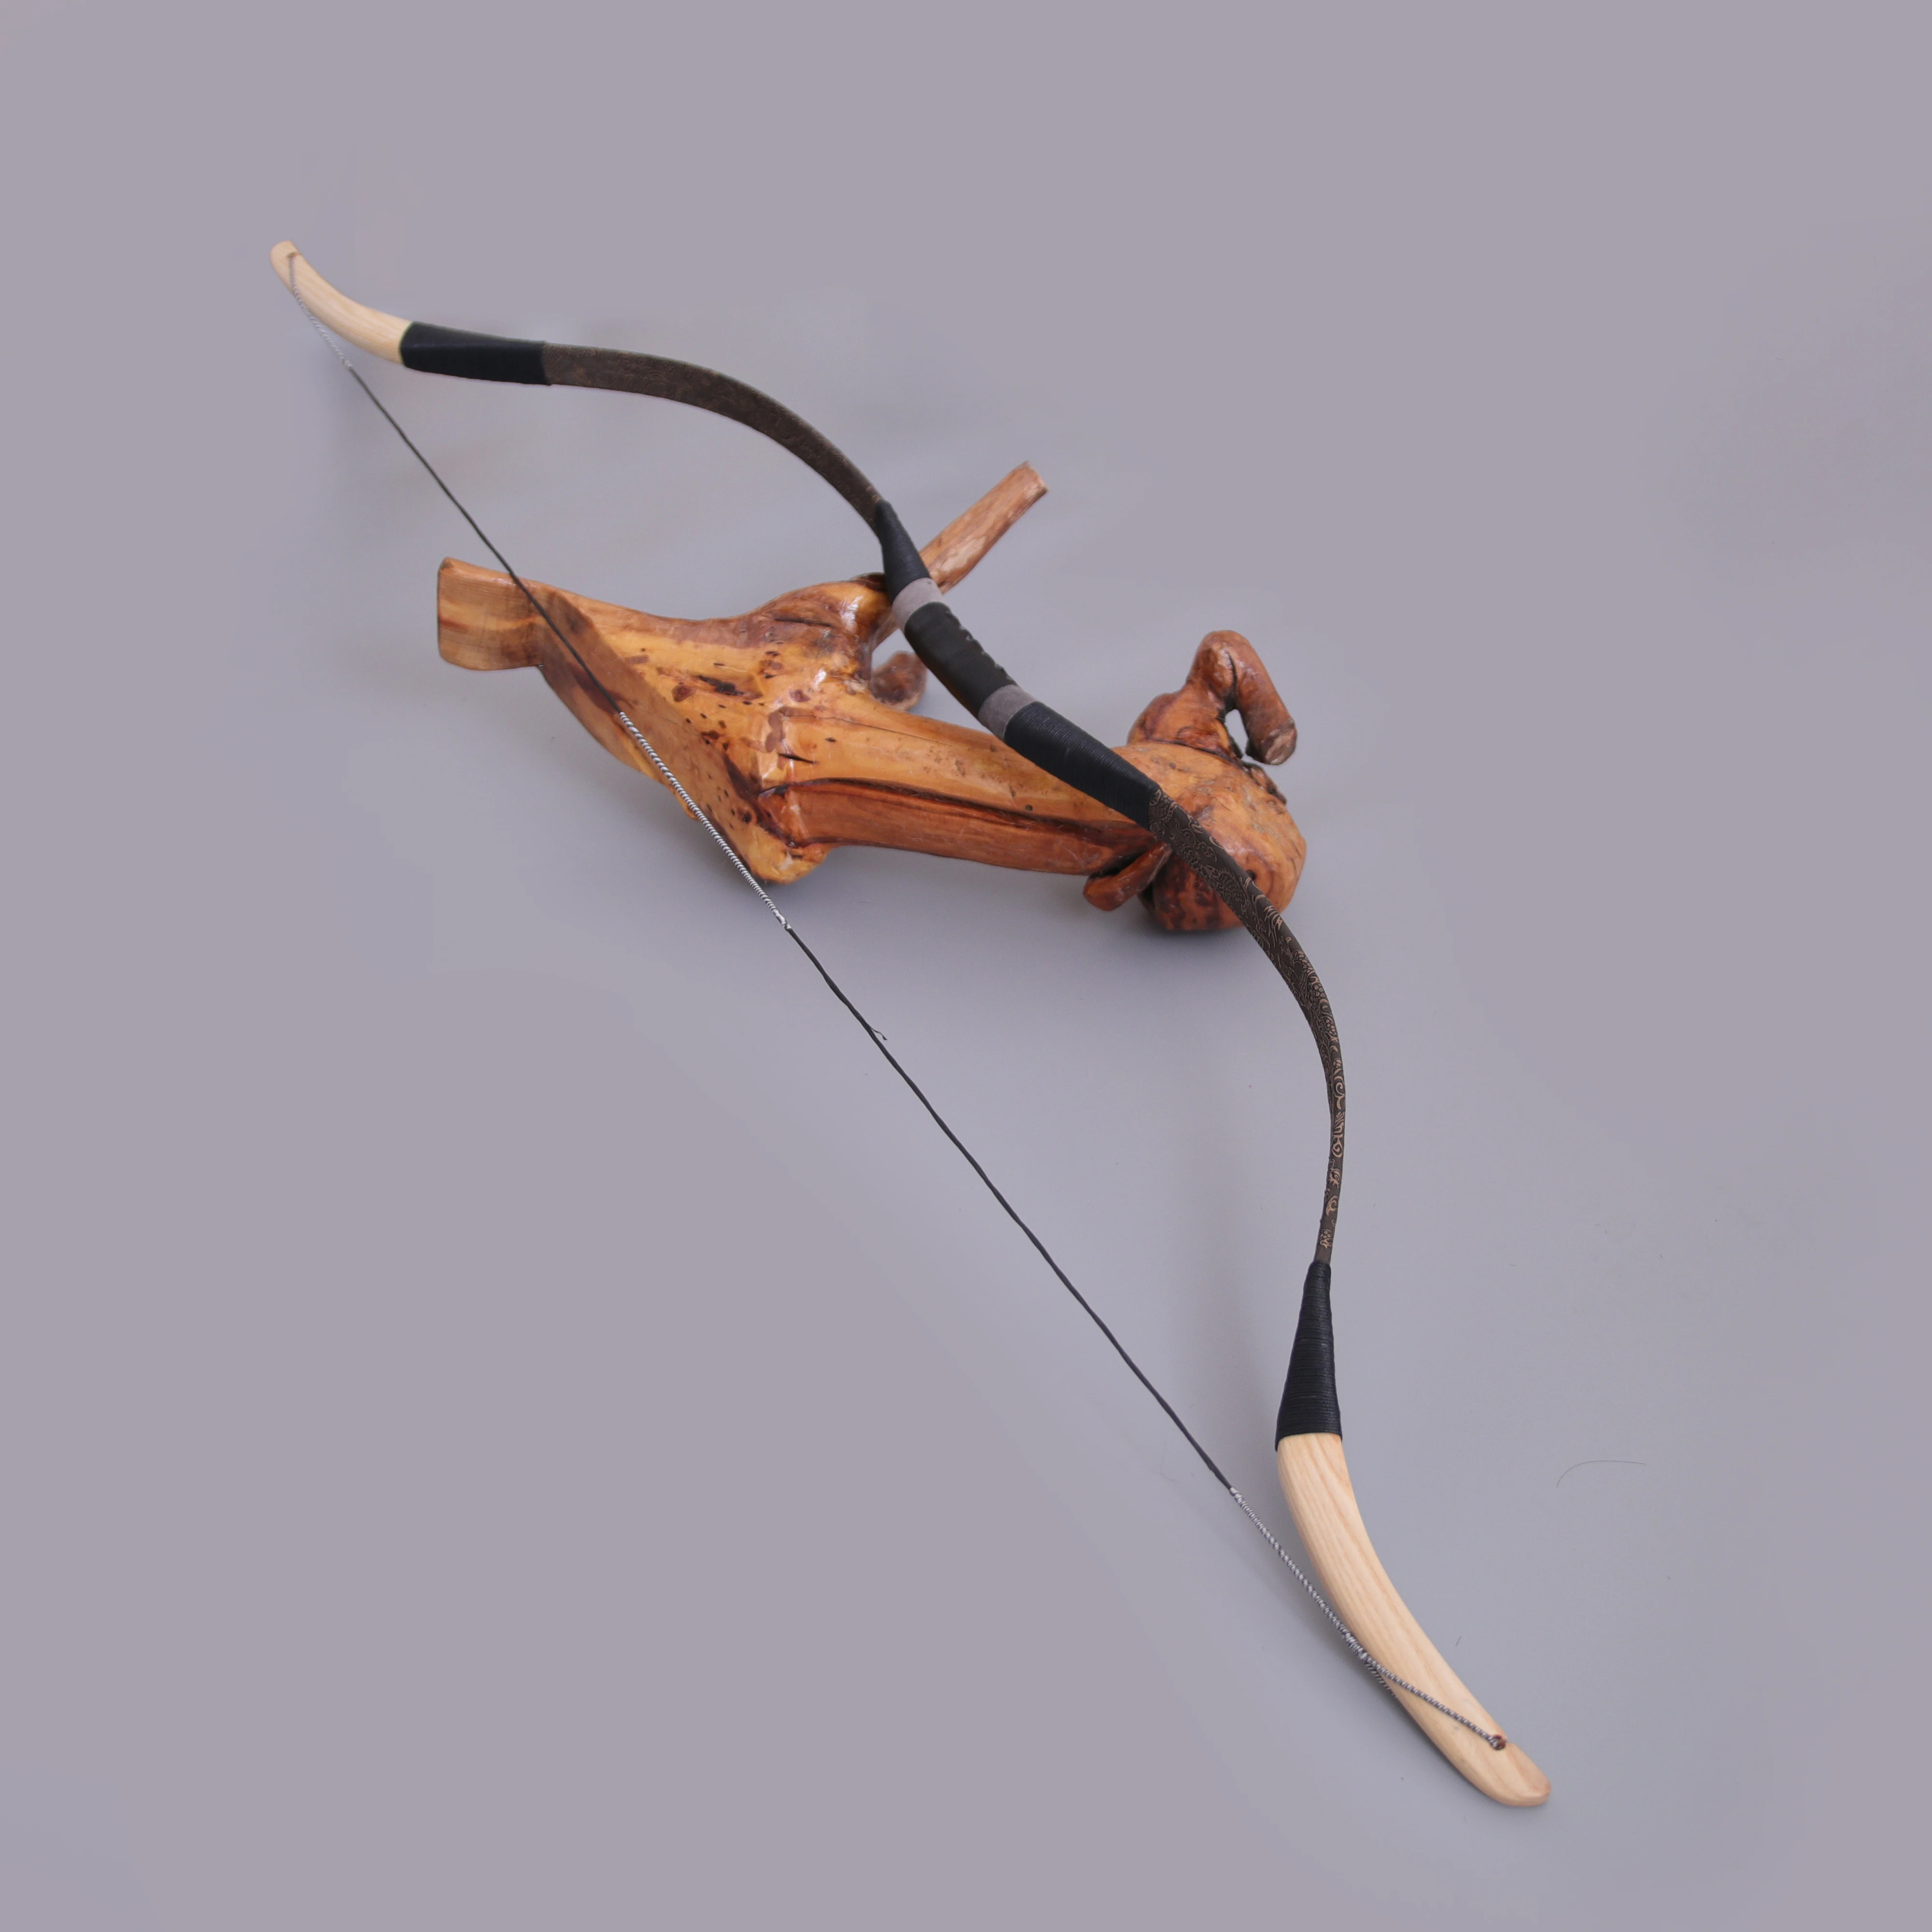 Wooden arrows for traditional and medieval archery